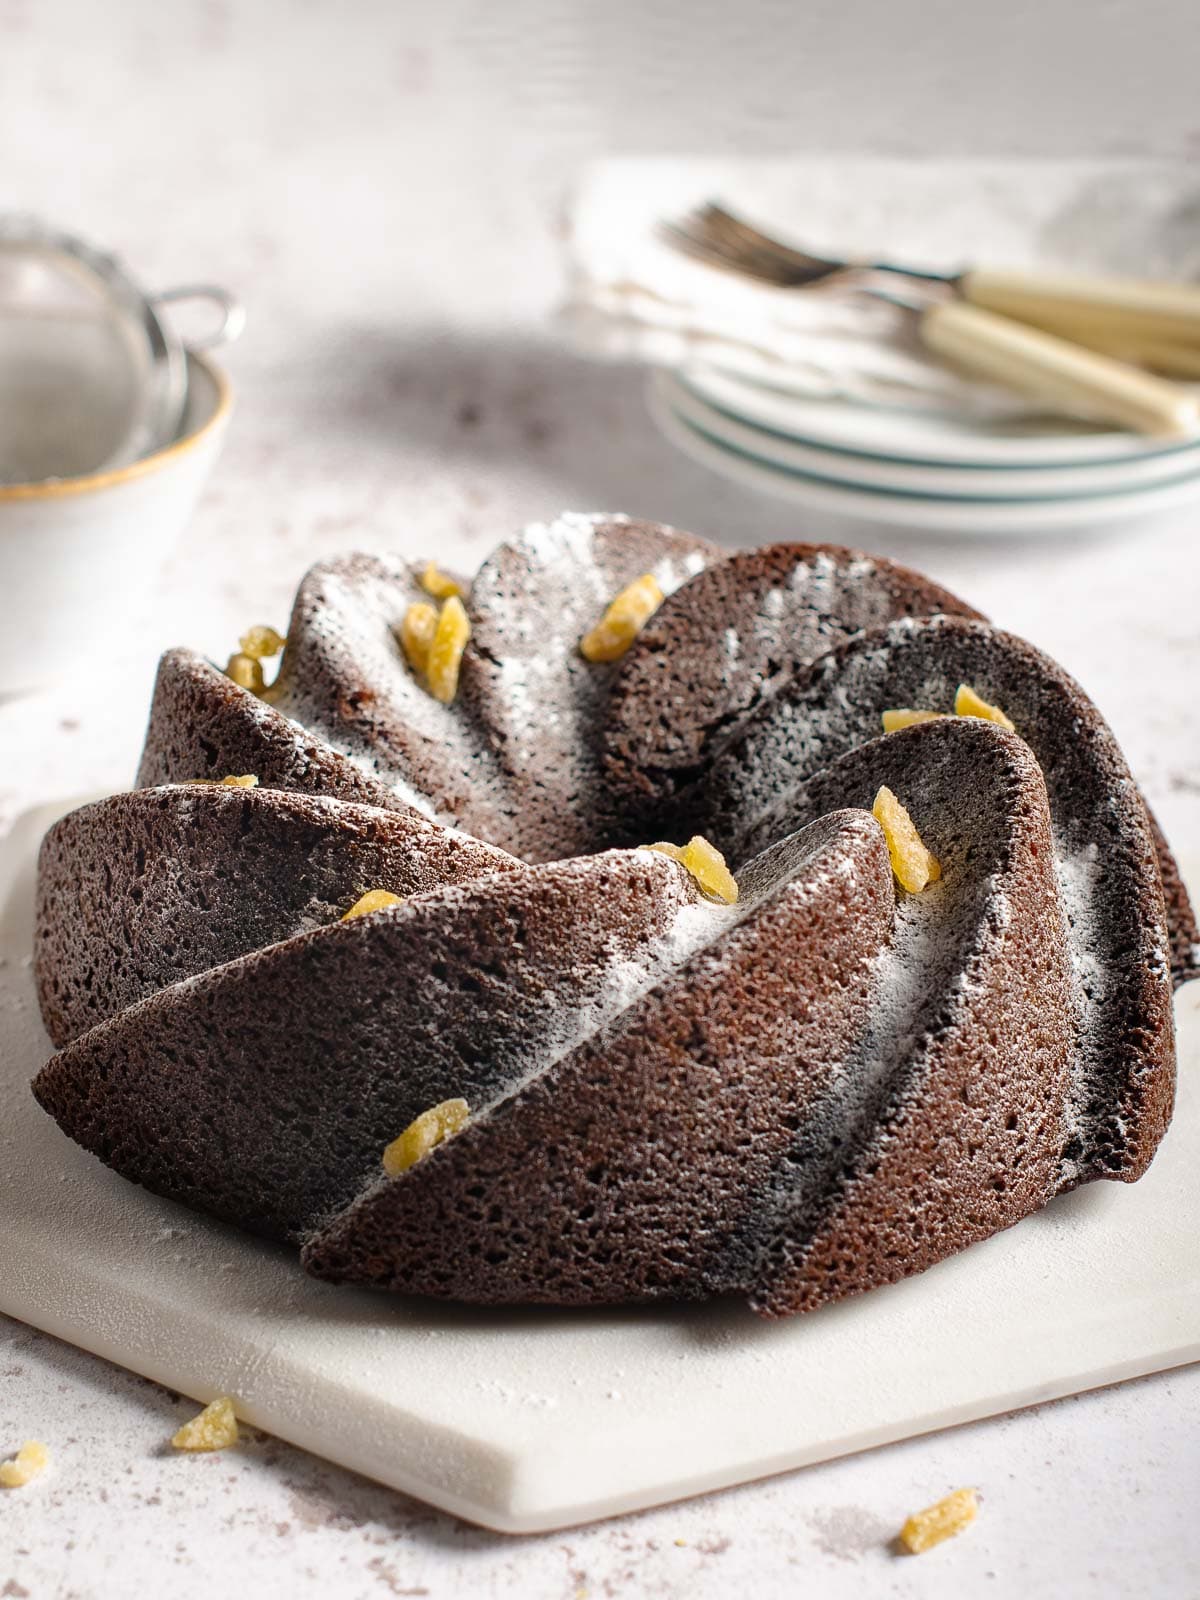 Gingerbread Bundt Cake, a spicy wintry treat - Blossom to Stem